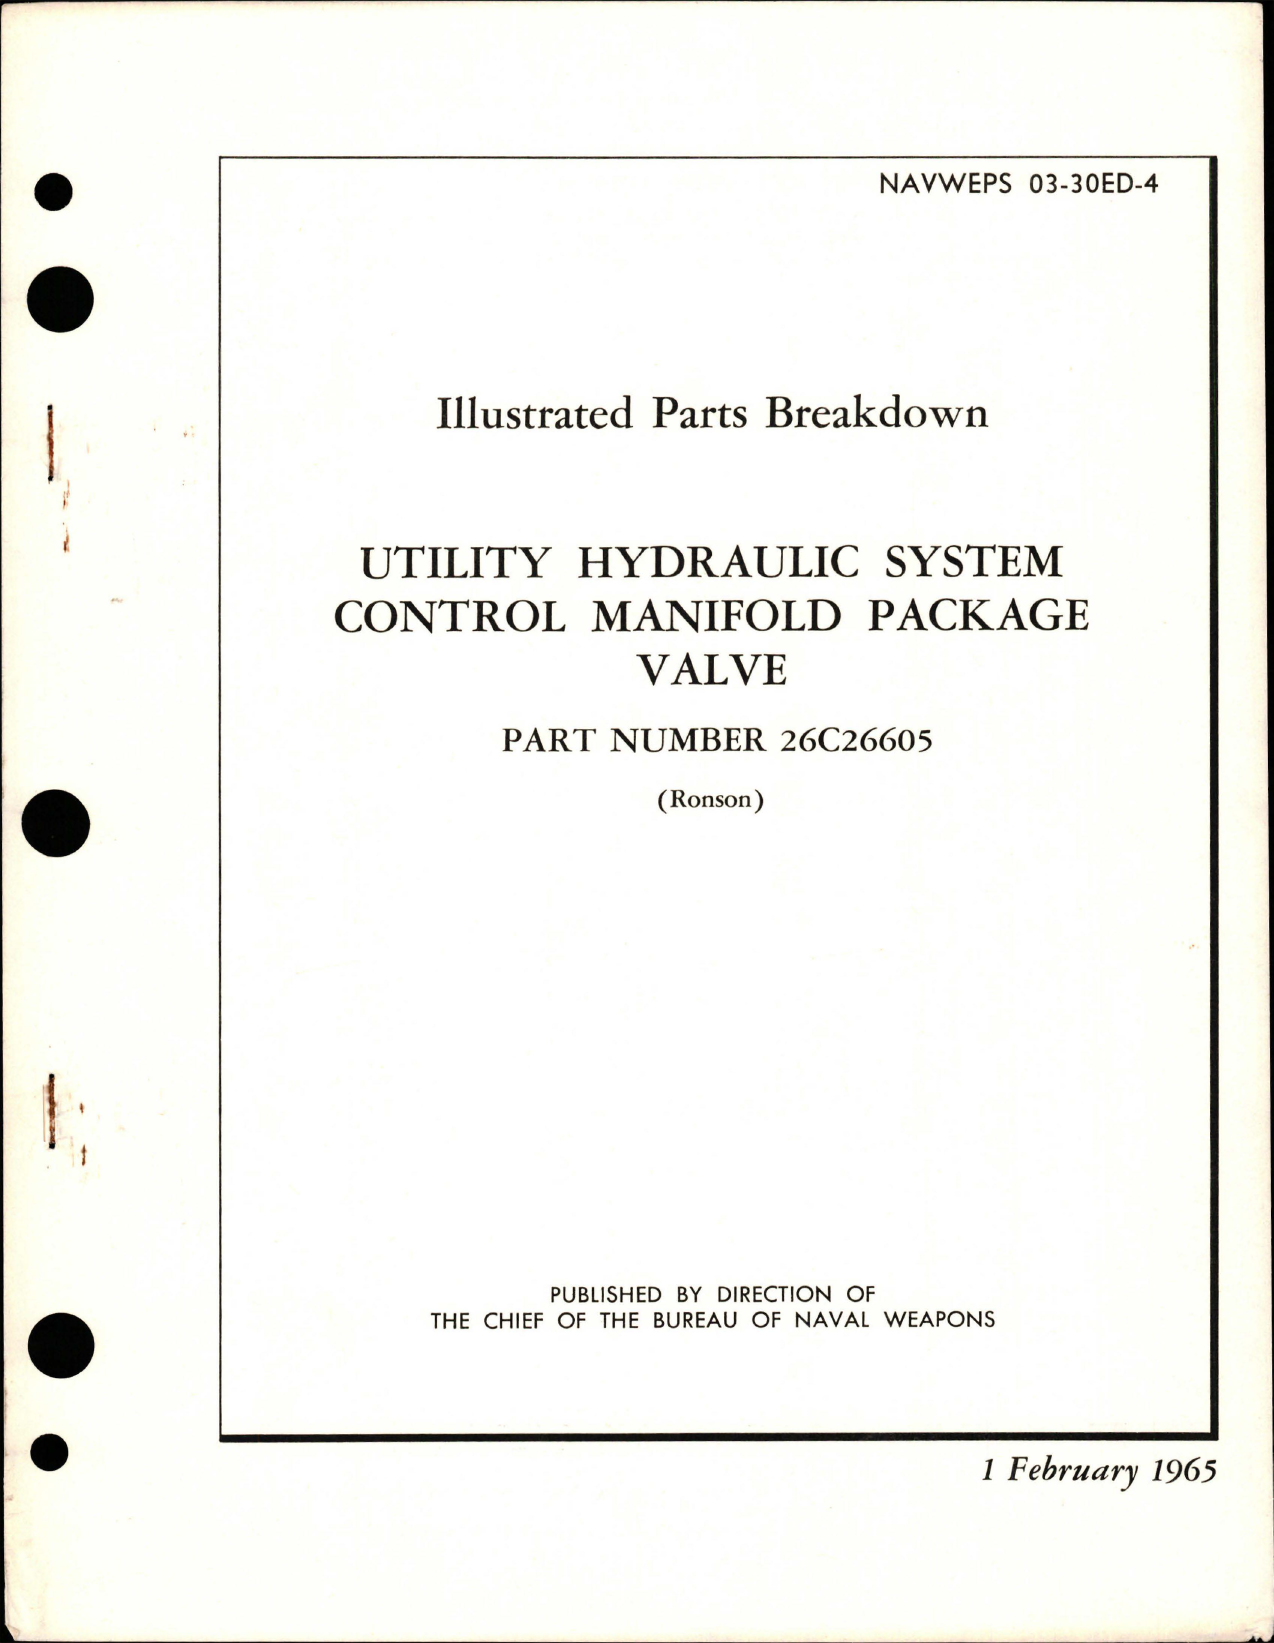 Sample page 1 from AirCorps Library document: Illustrated Parts Breakdown for Utility Hydraulic System Control Manifold Package Valve - Part 26C26605